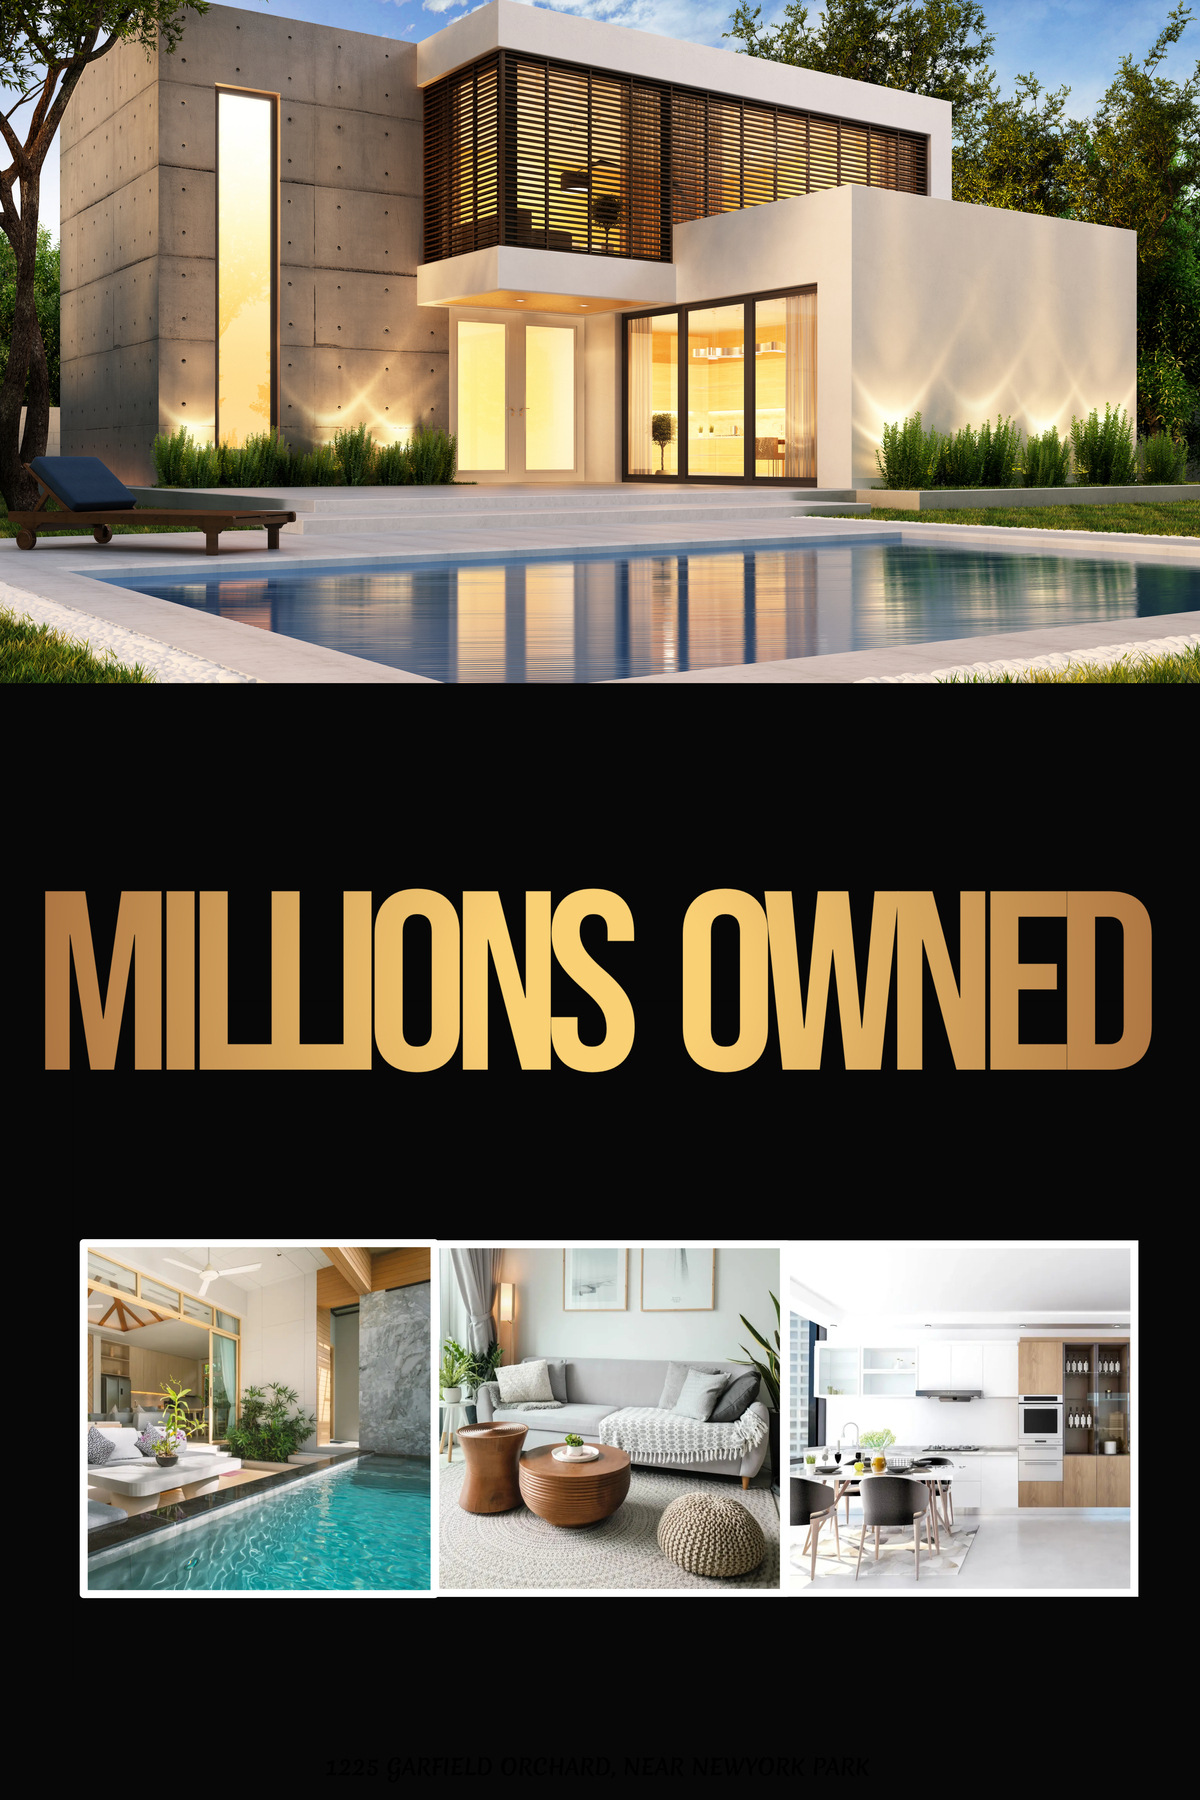 Millions In Real Estate Owned Free & Clear, Last Minute Pop Up Event In Atlanta, Georgia On Thursday, August 1st